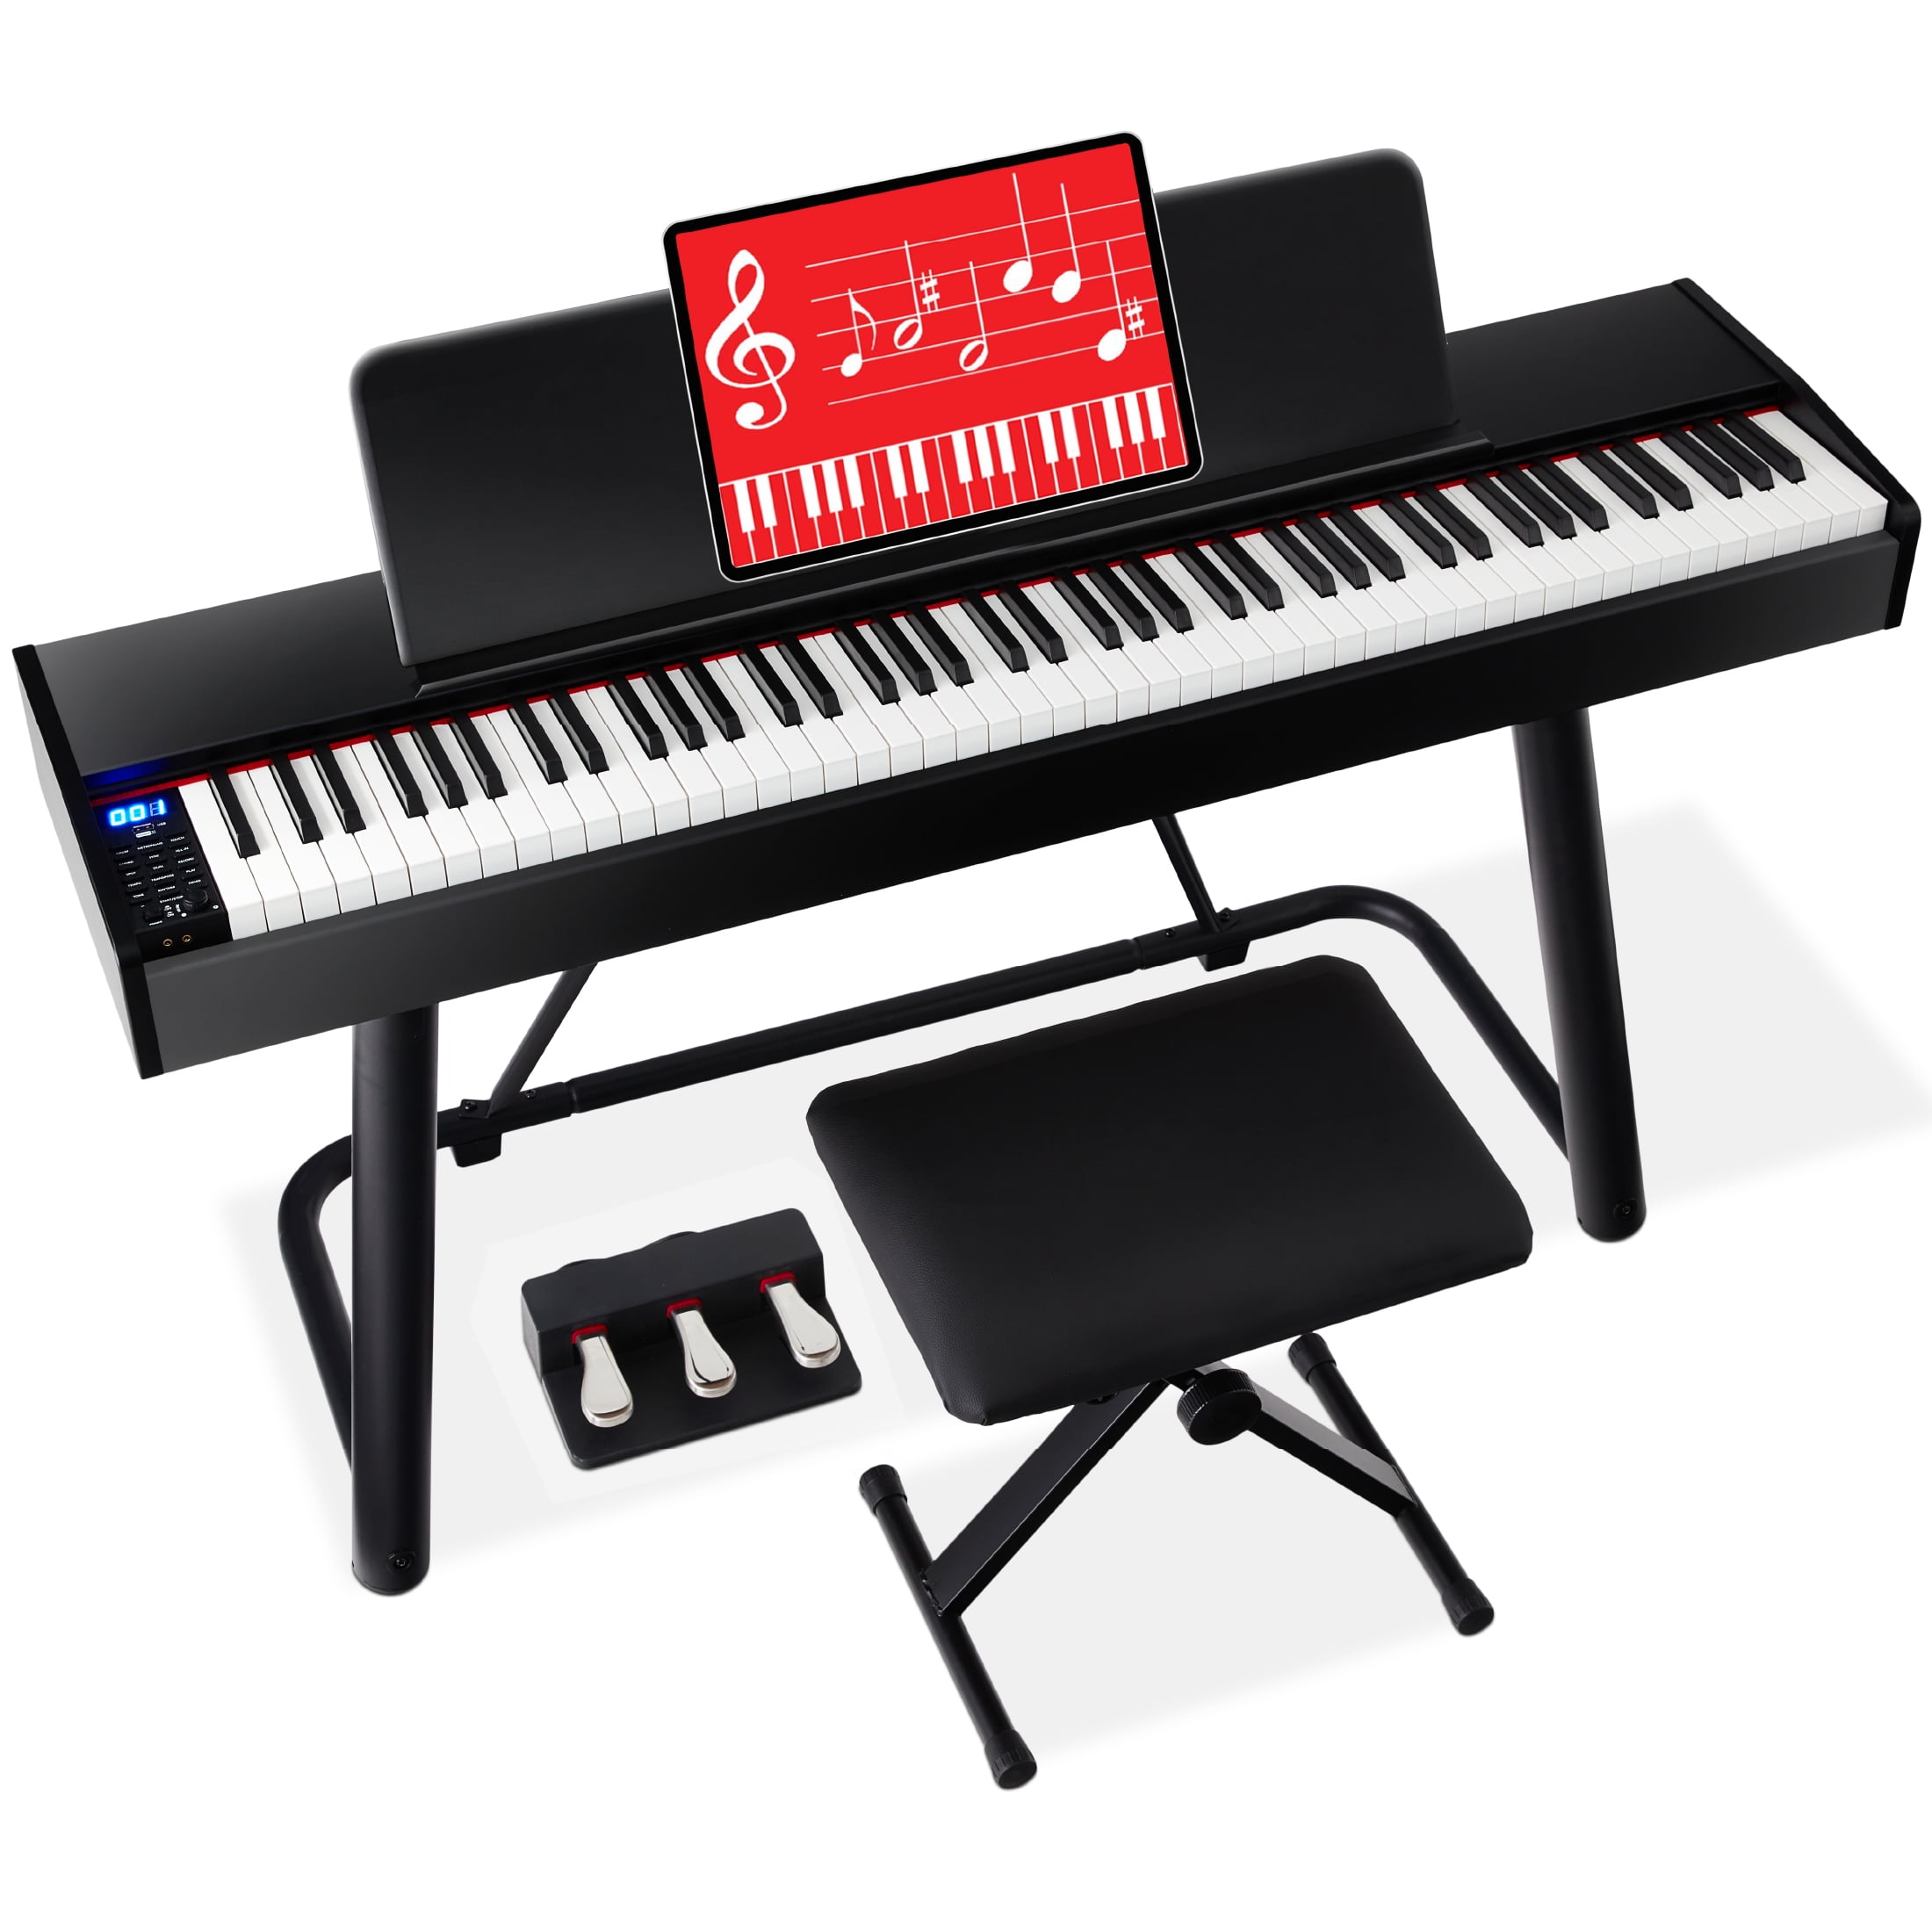 Learn piano online by yourself. Use a tablet or computer to learn piano  tutorials online. The black grand piano has a tablet placed on a notebook  stand. 3D Rendering. 6666658 Stock Photo